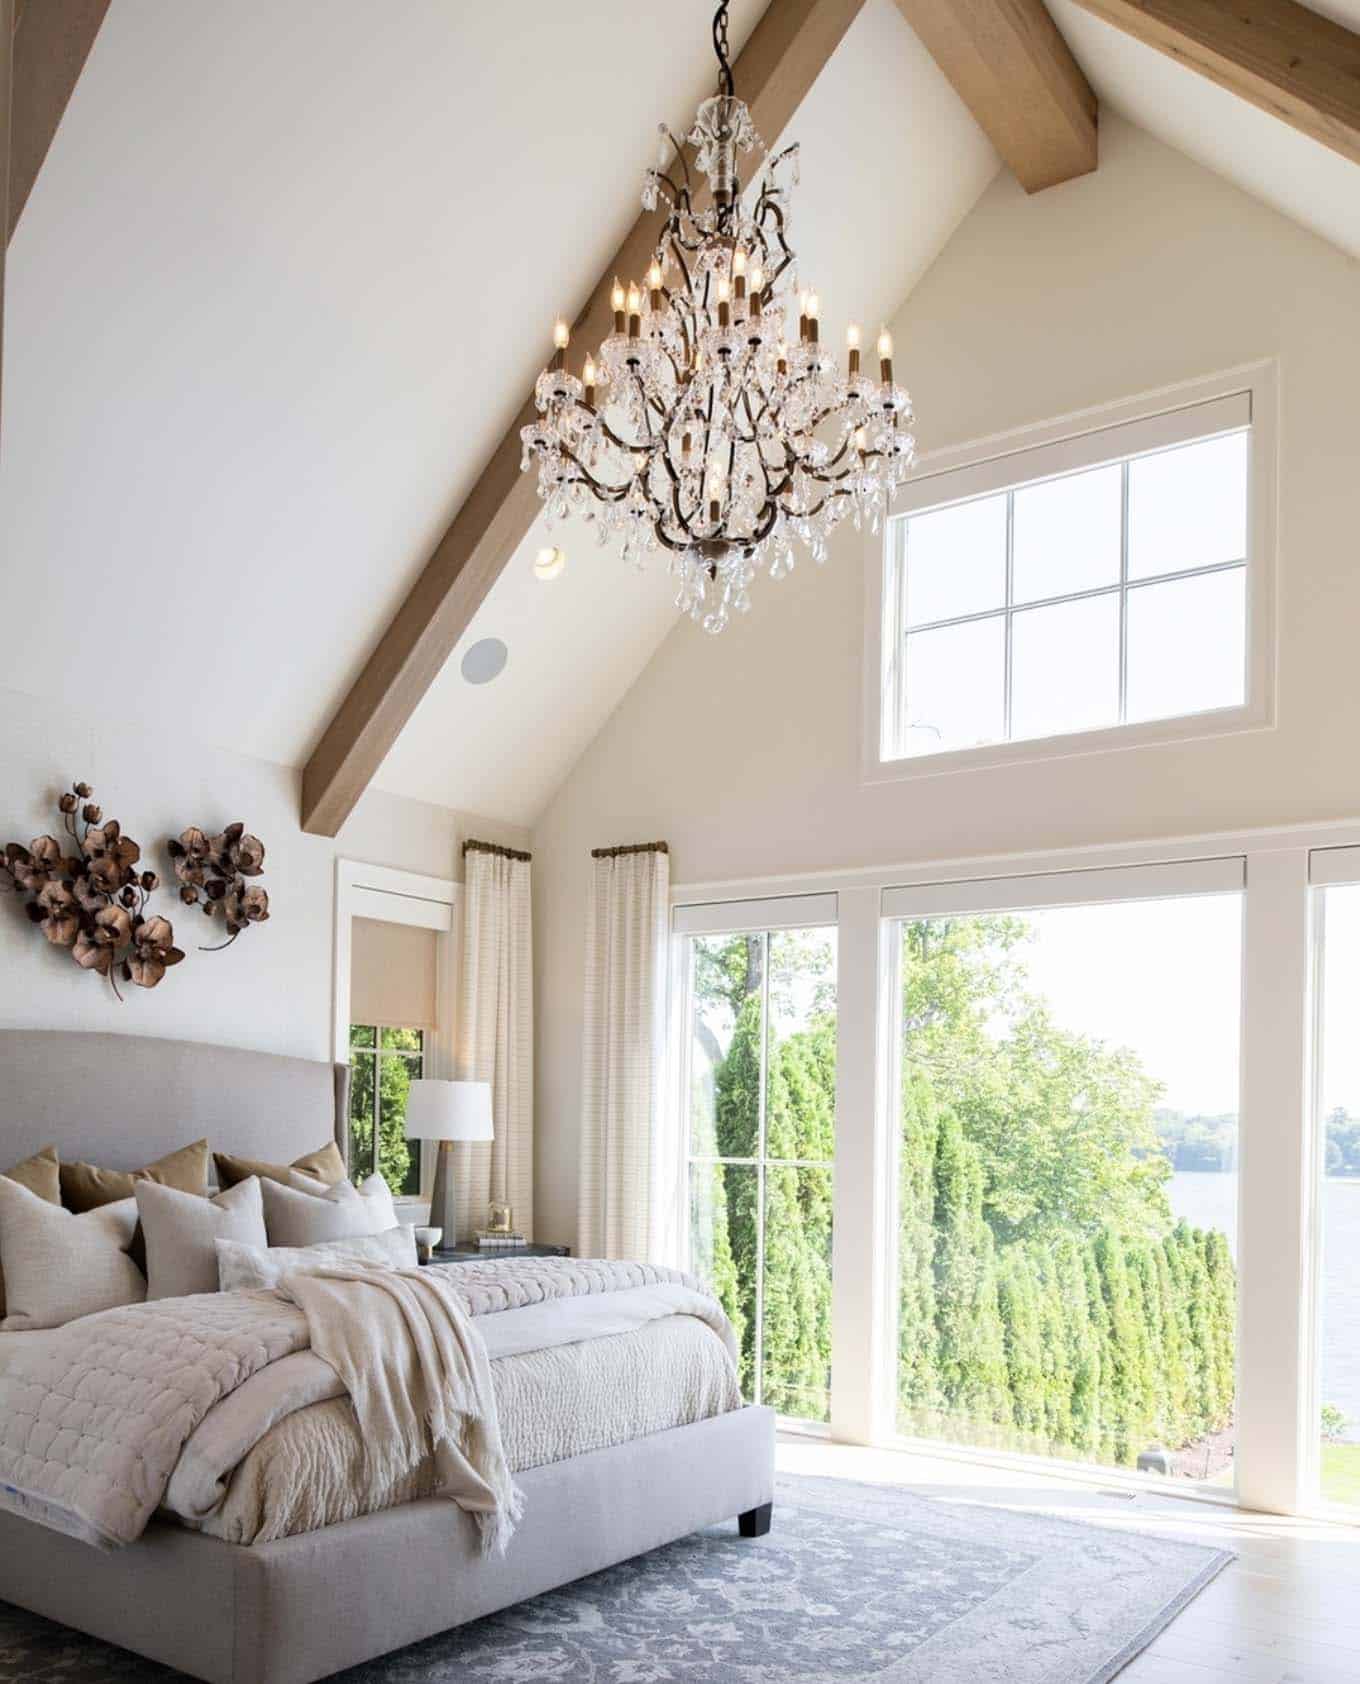 Bedroom with large windows, wooden beams, high ceiling and chandelier